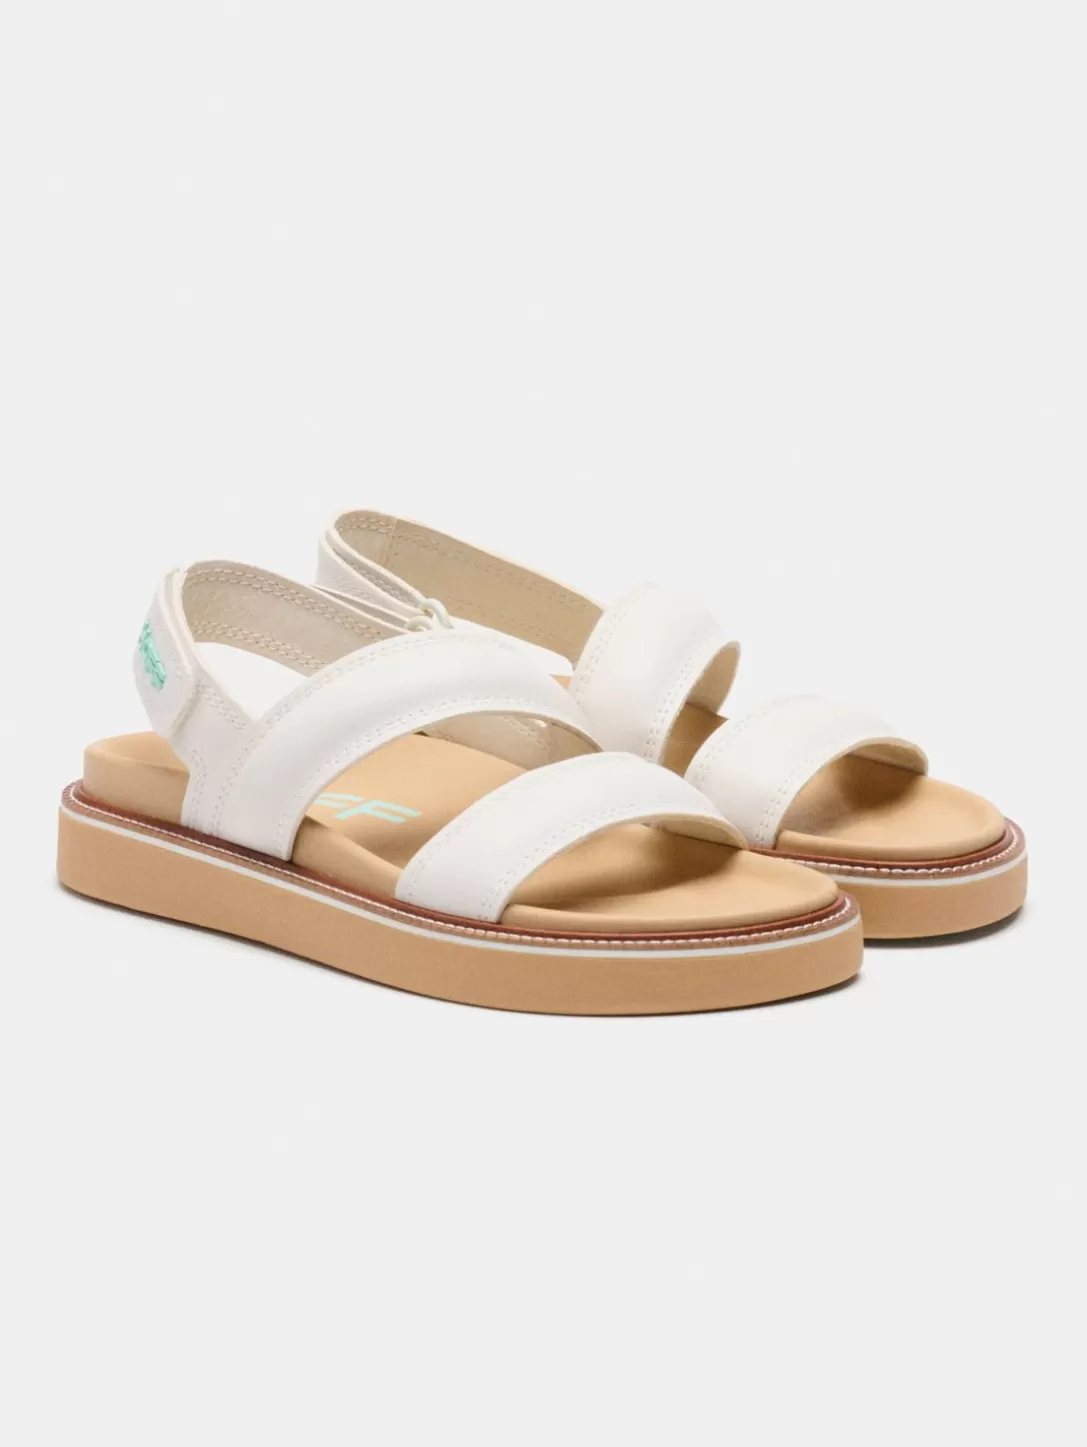 HOFF Sandal Leather Road Off White Hot